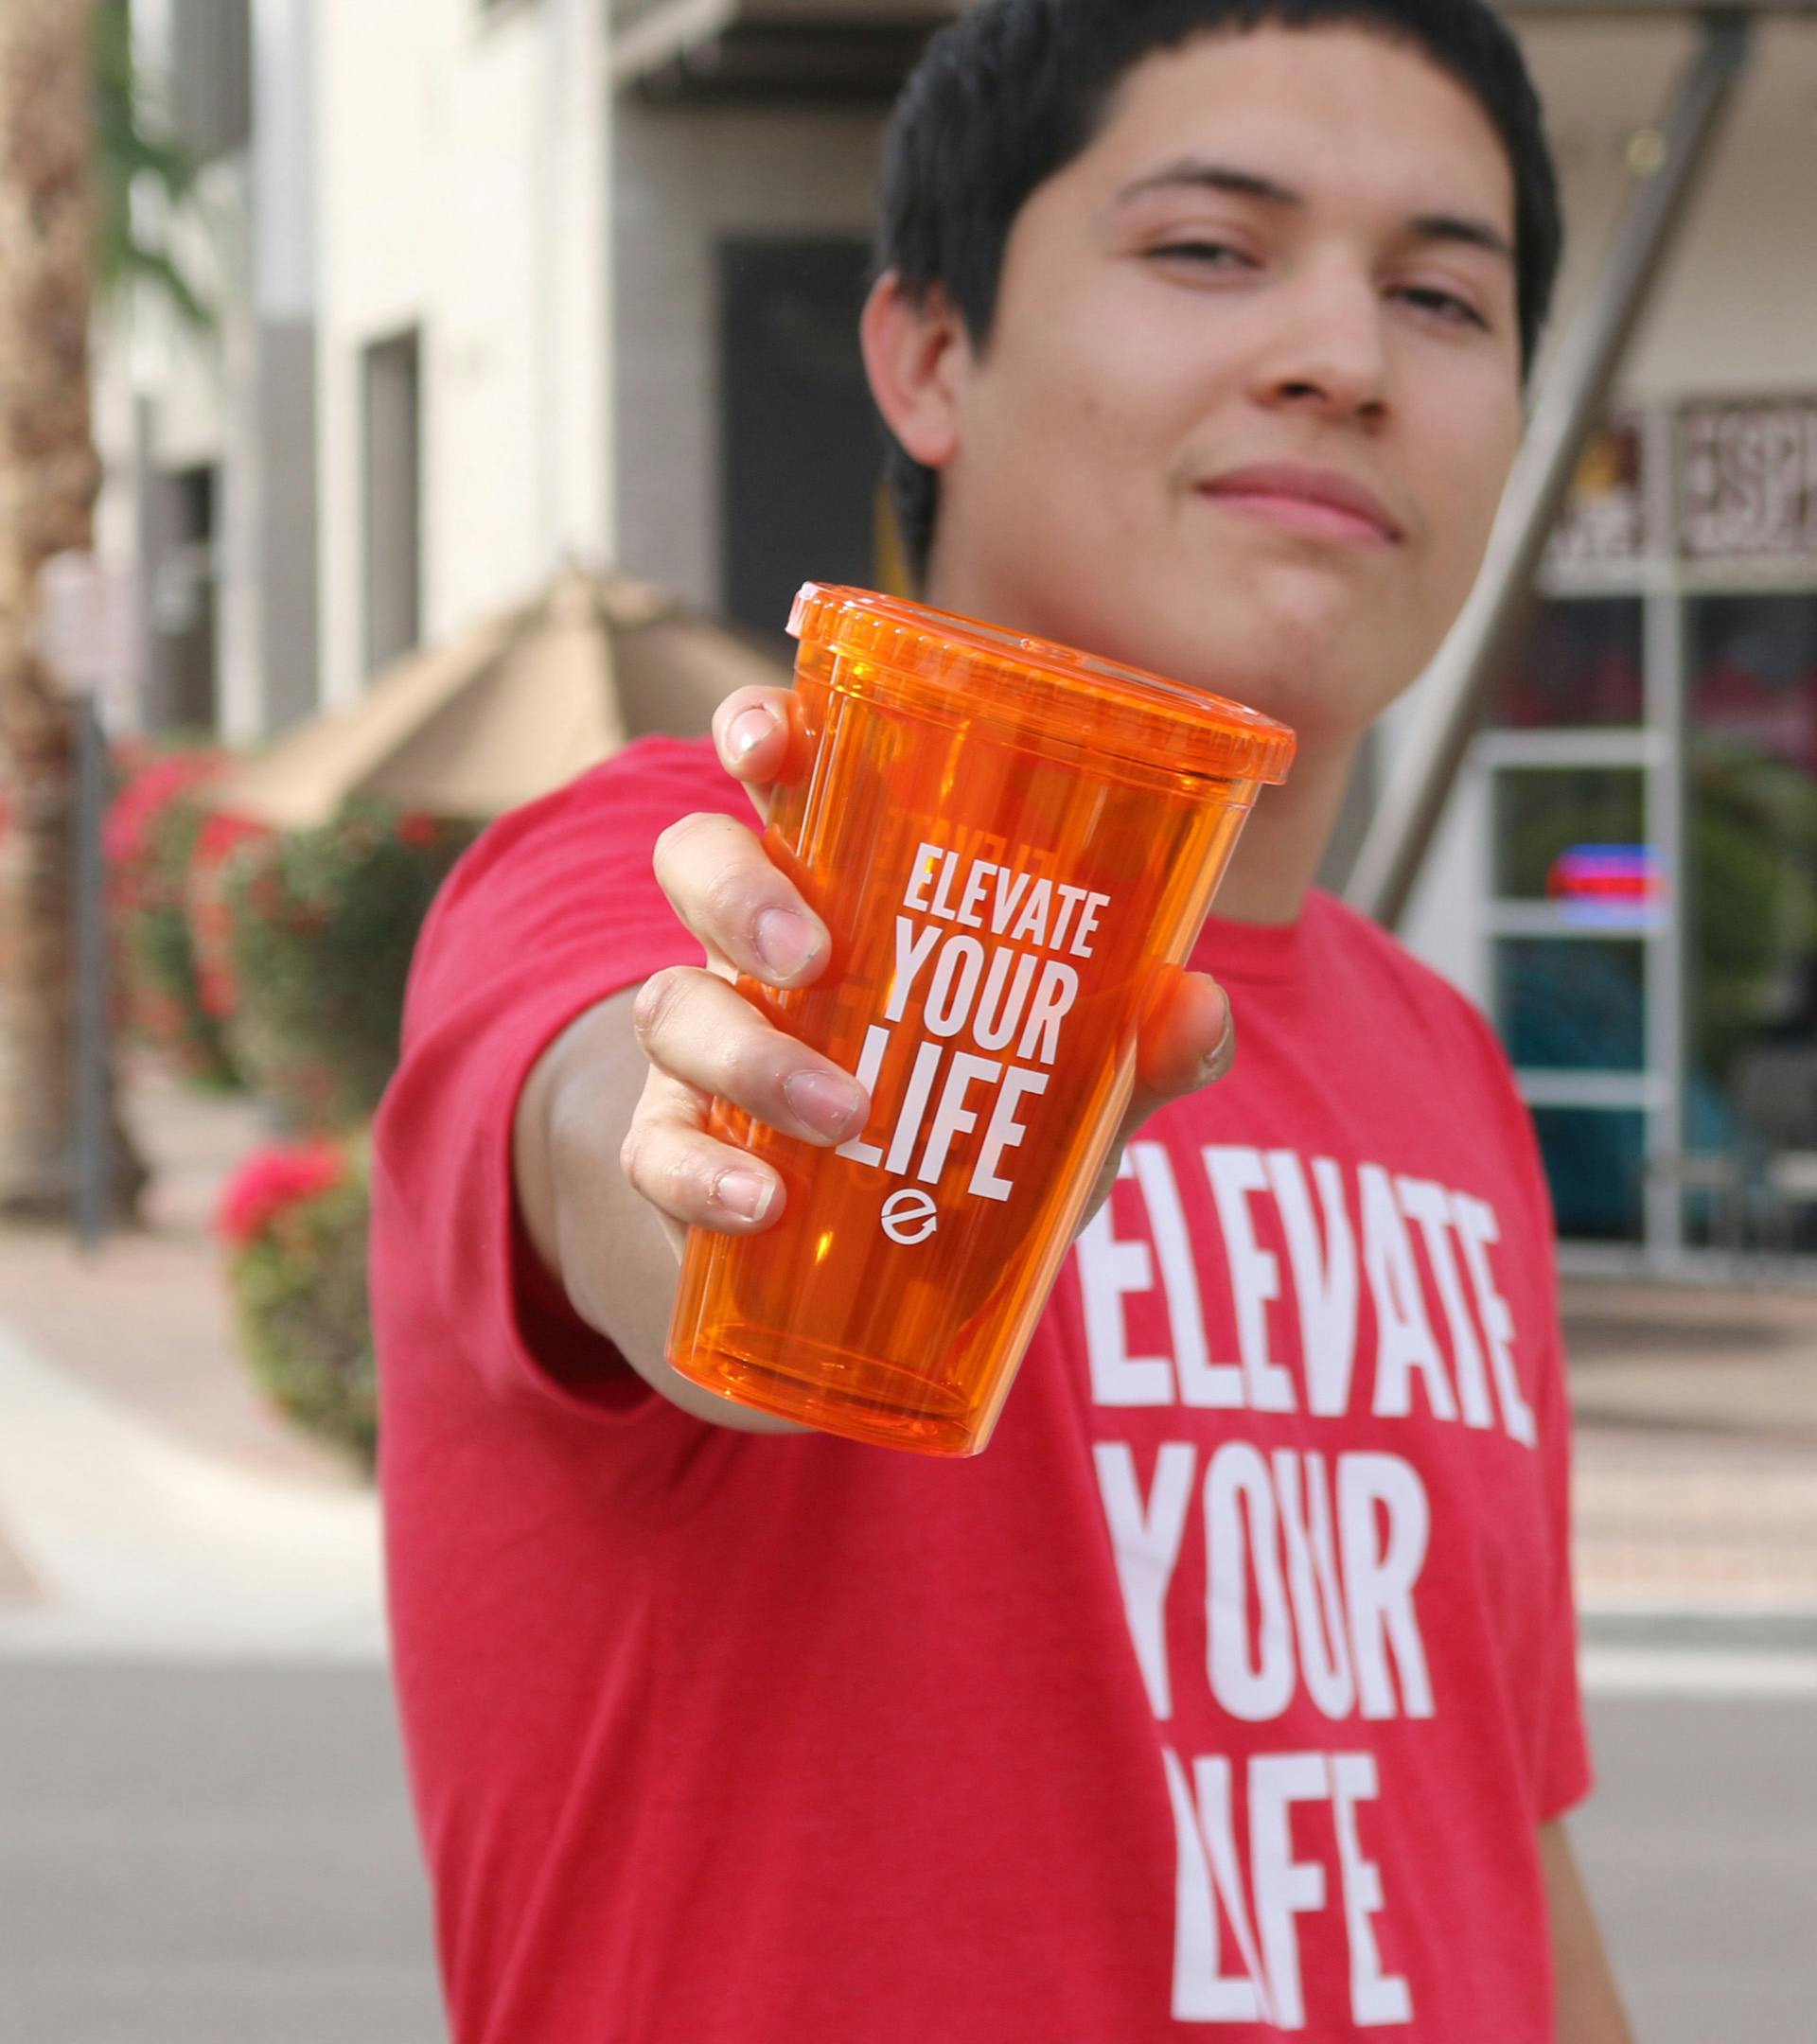 A guy who is slightly blurred holding an orange Elevate Your Life  tumbler in front that is in focus